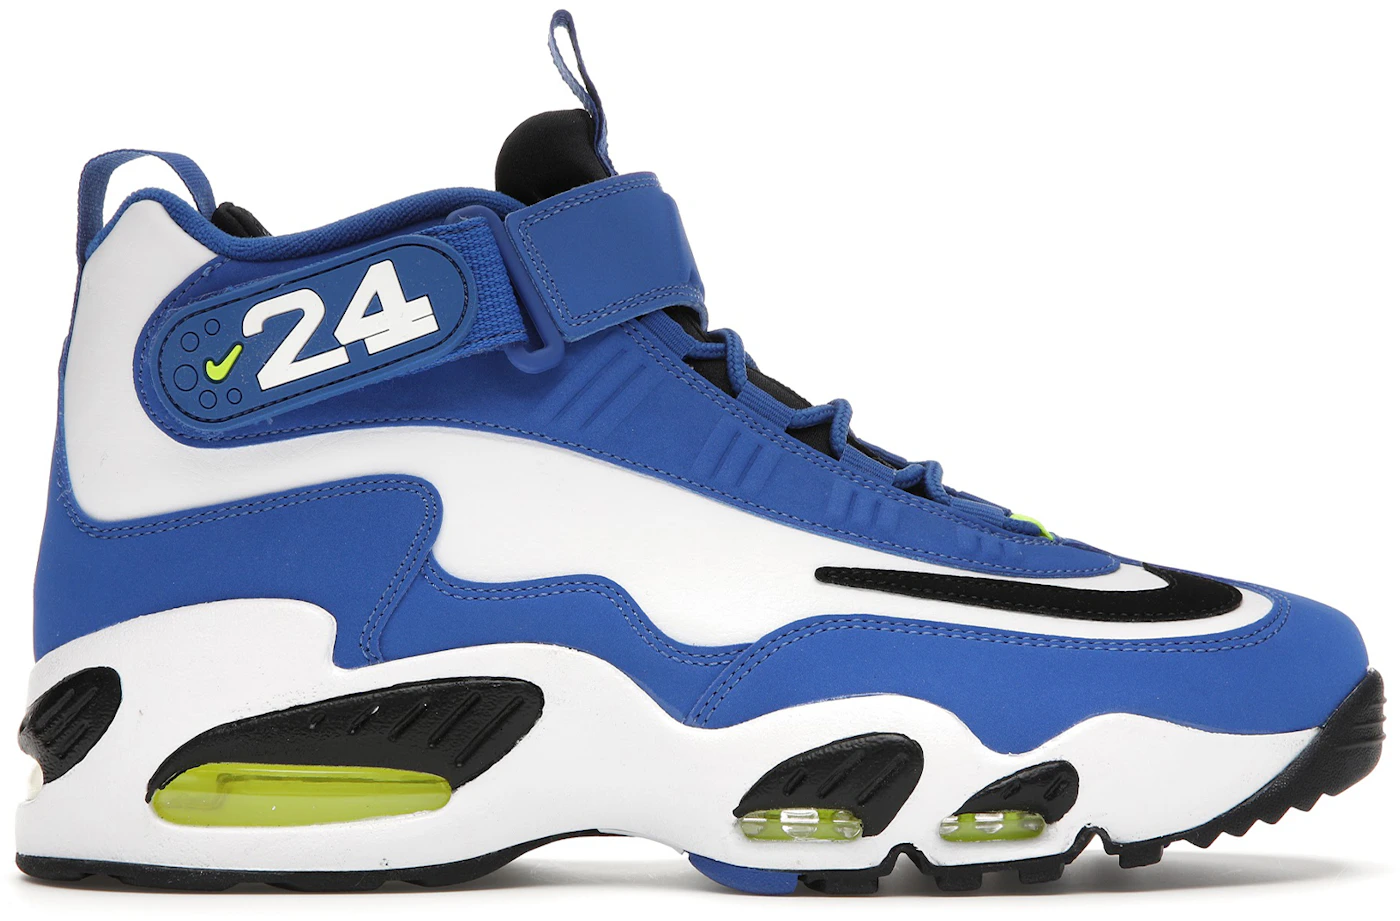 Sneaker Shouts™ on X: On foot look at the Nike Air Griffey Max 1